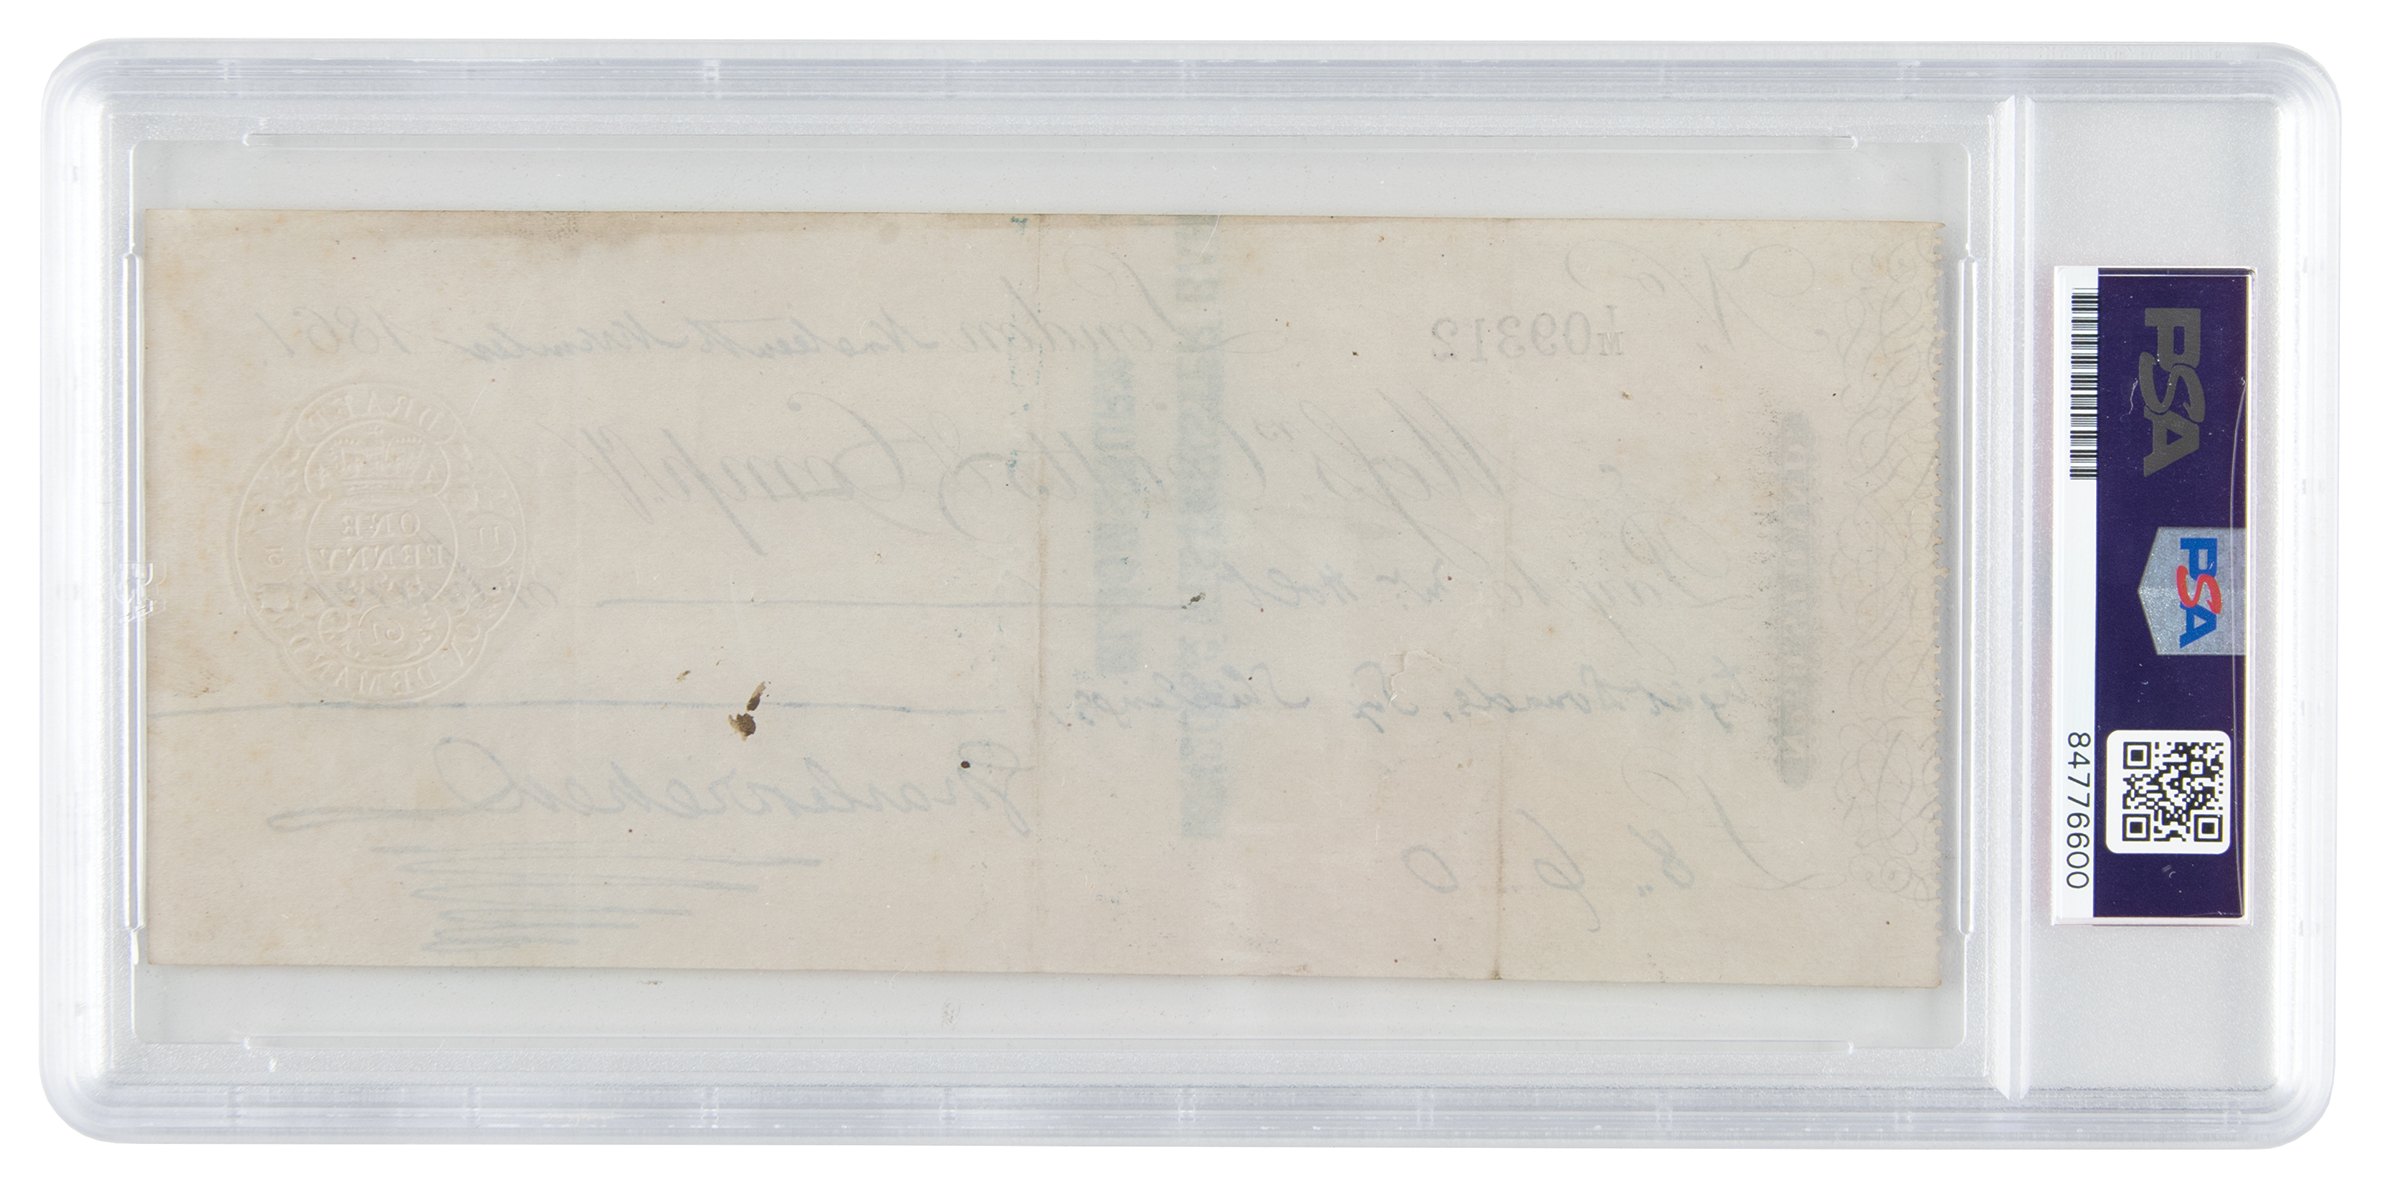 Lot #7214 Charles Dickens Signed Check - PSA NM-MT 8 - Image 2